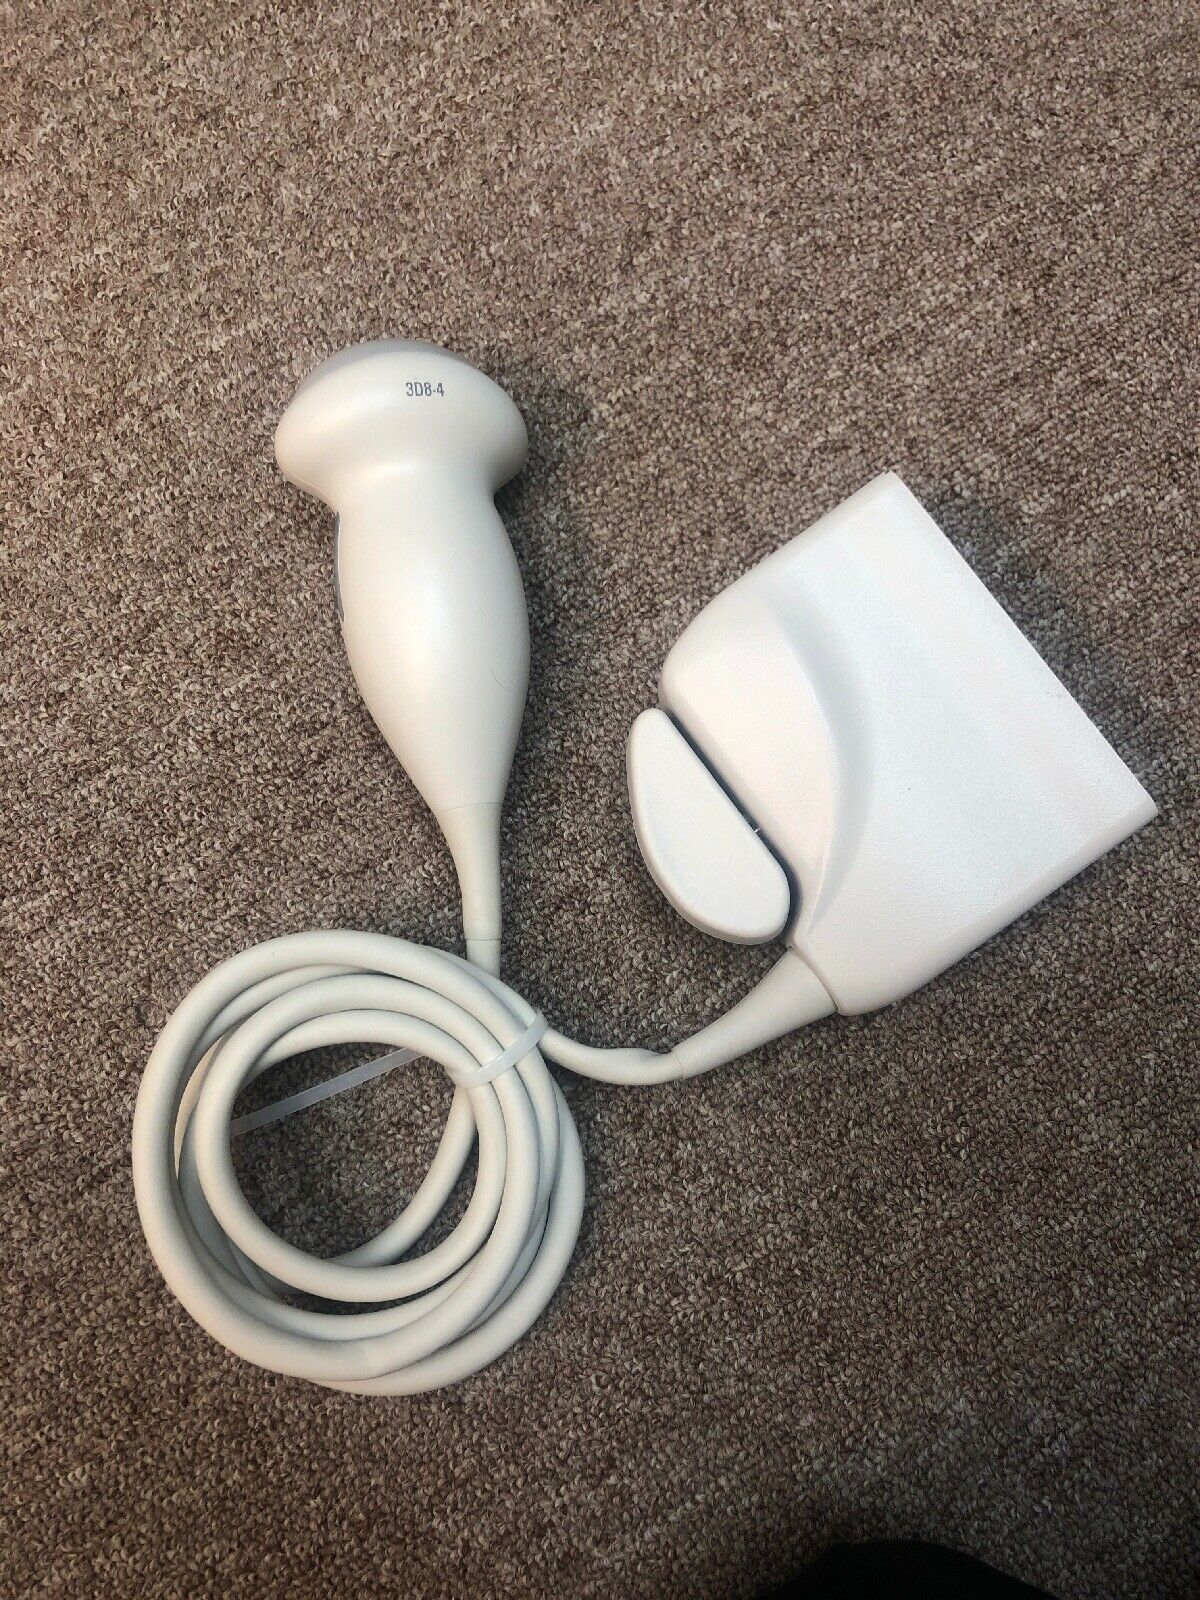 Philips 3D8-4 Ultrasound Transducer Probe DIAGNOSTIC ULTRASOUND MACHINES FOR SALE